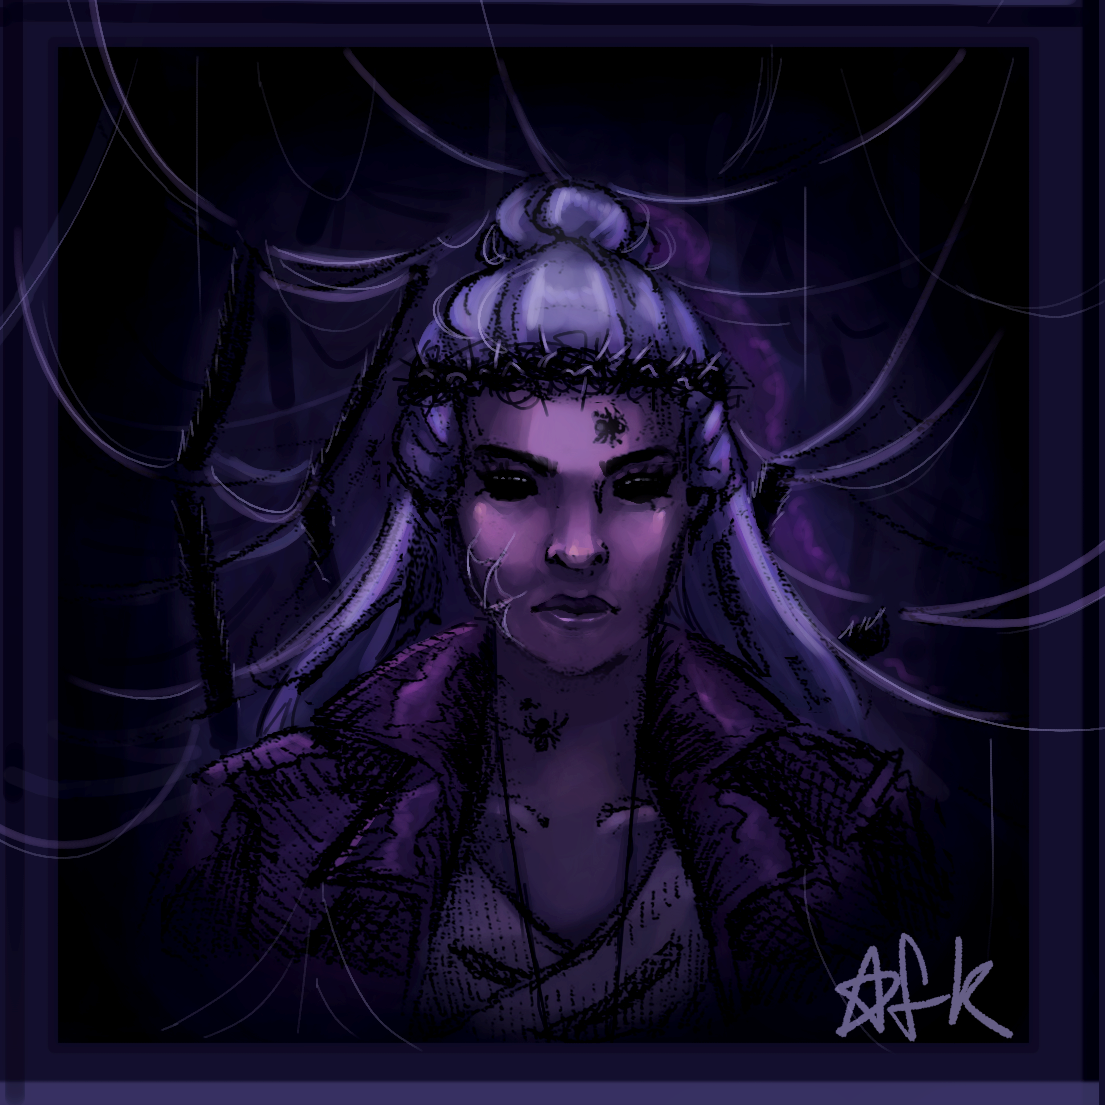 lolthies / comms open on X: Portrait practice with Poska! 🥰 #exu  #exandriaunlimited #criticalrole #criticalrolefanart  #exandriaunlimitedfanart #dnd #dnd5e  / X